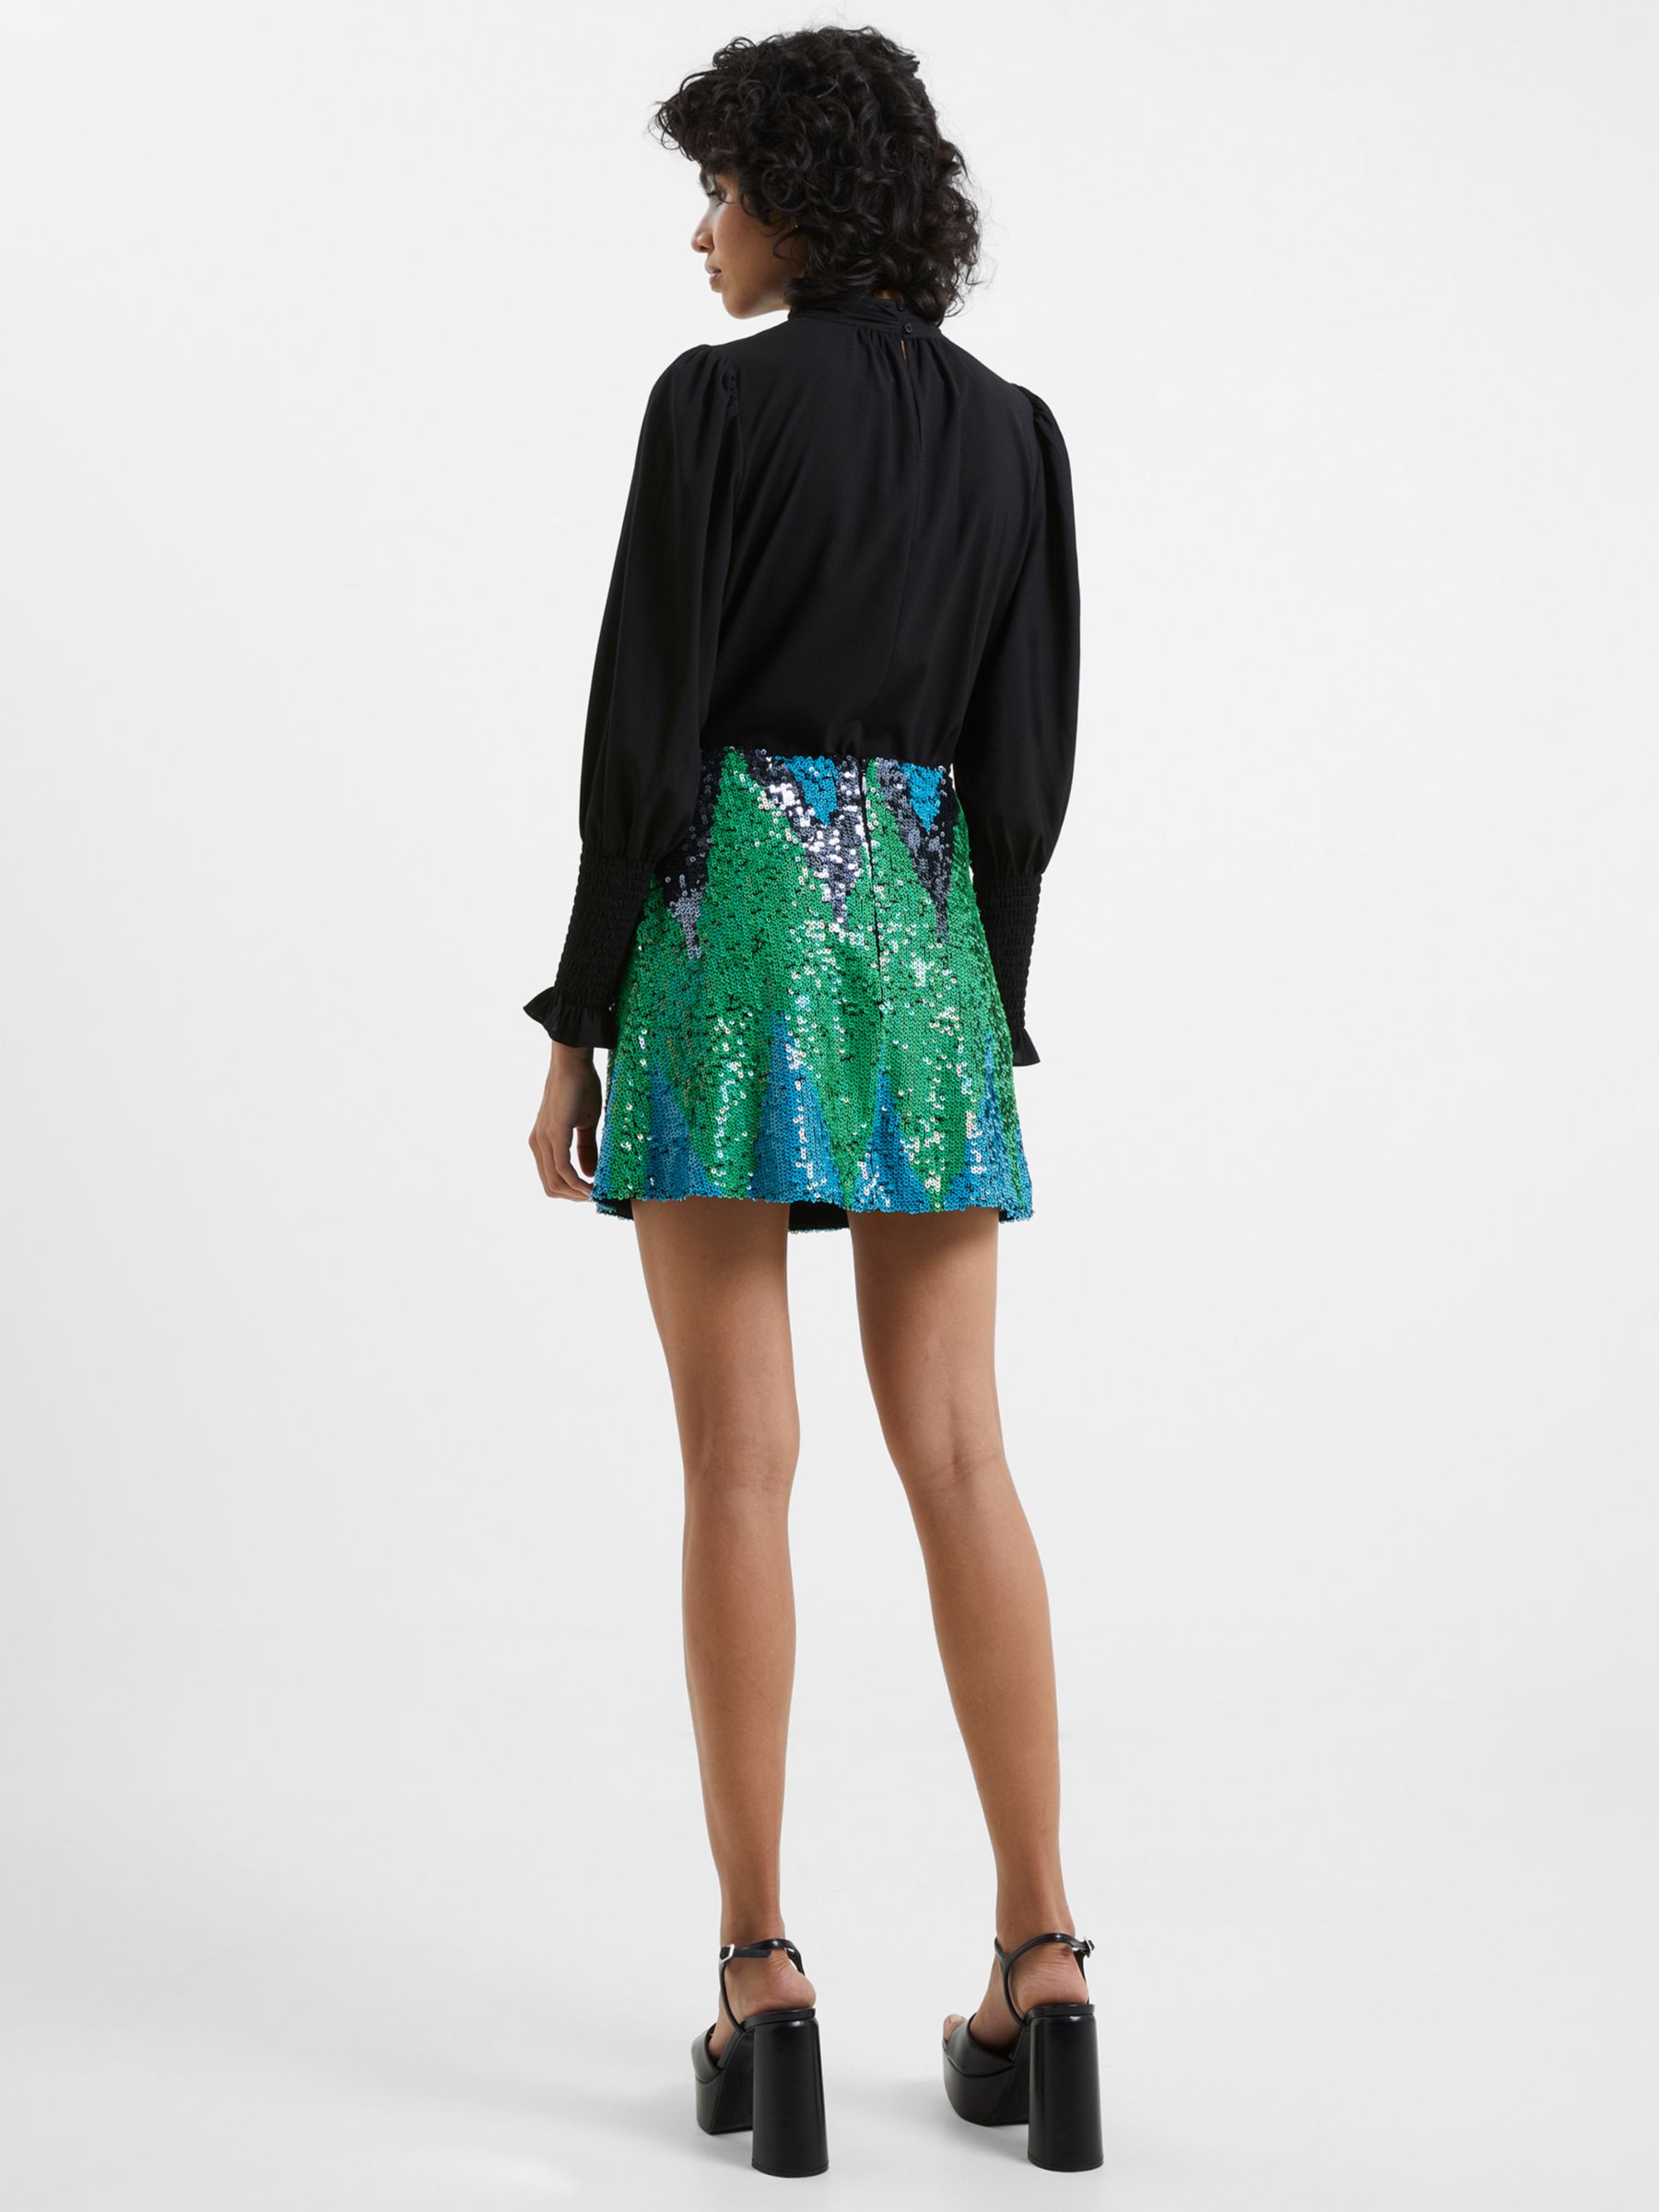 French Connection Emin Embellished Mini Skirt, Green Mineral/Multi, 8